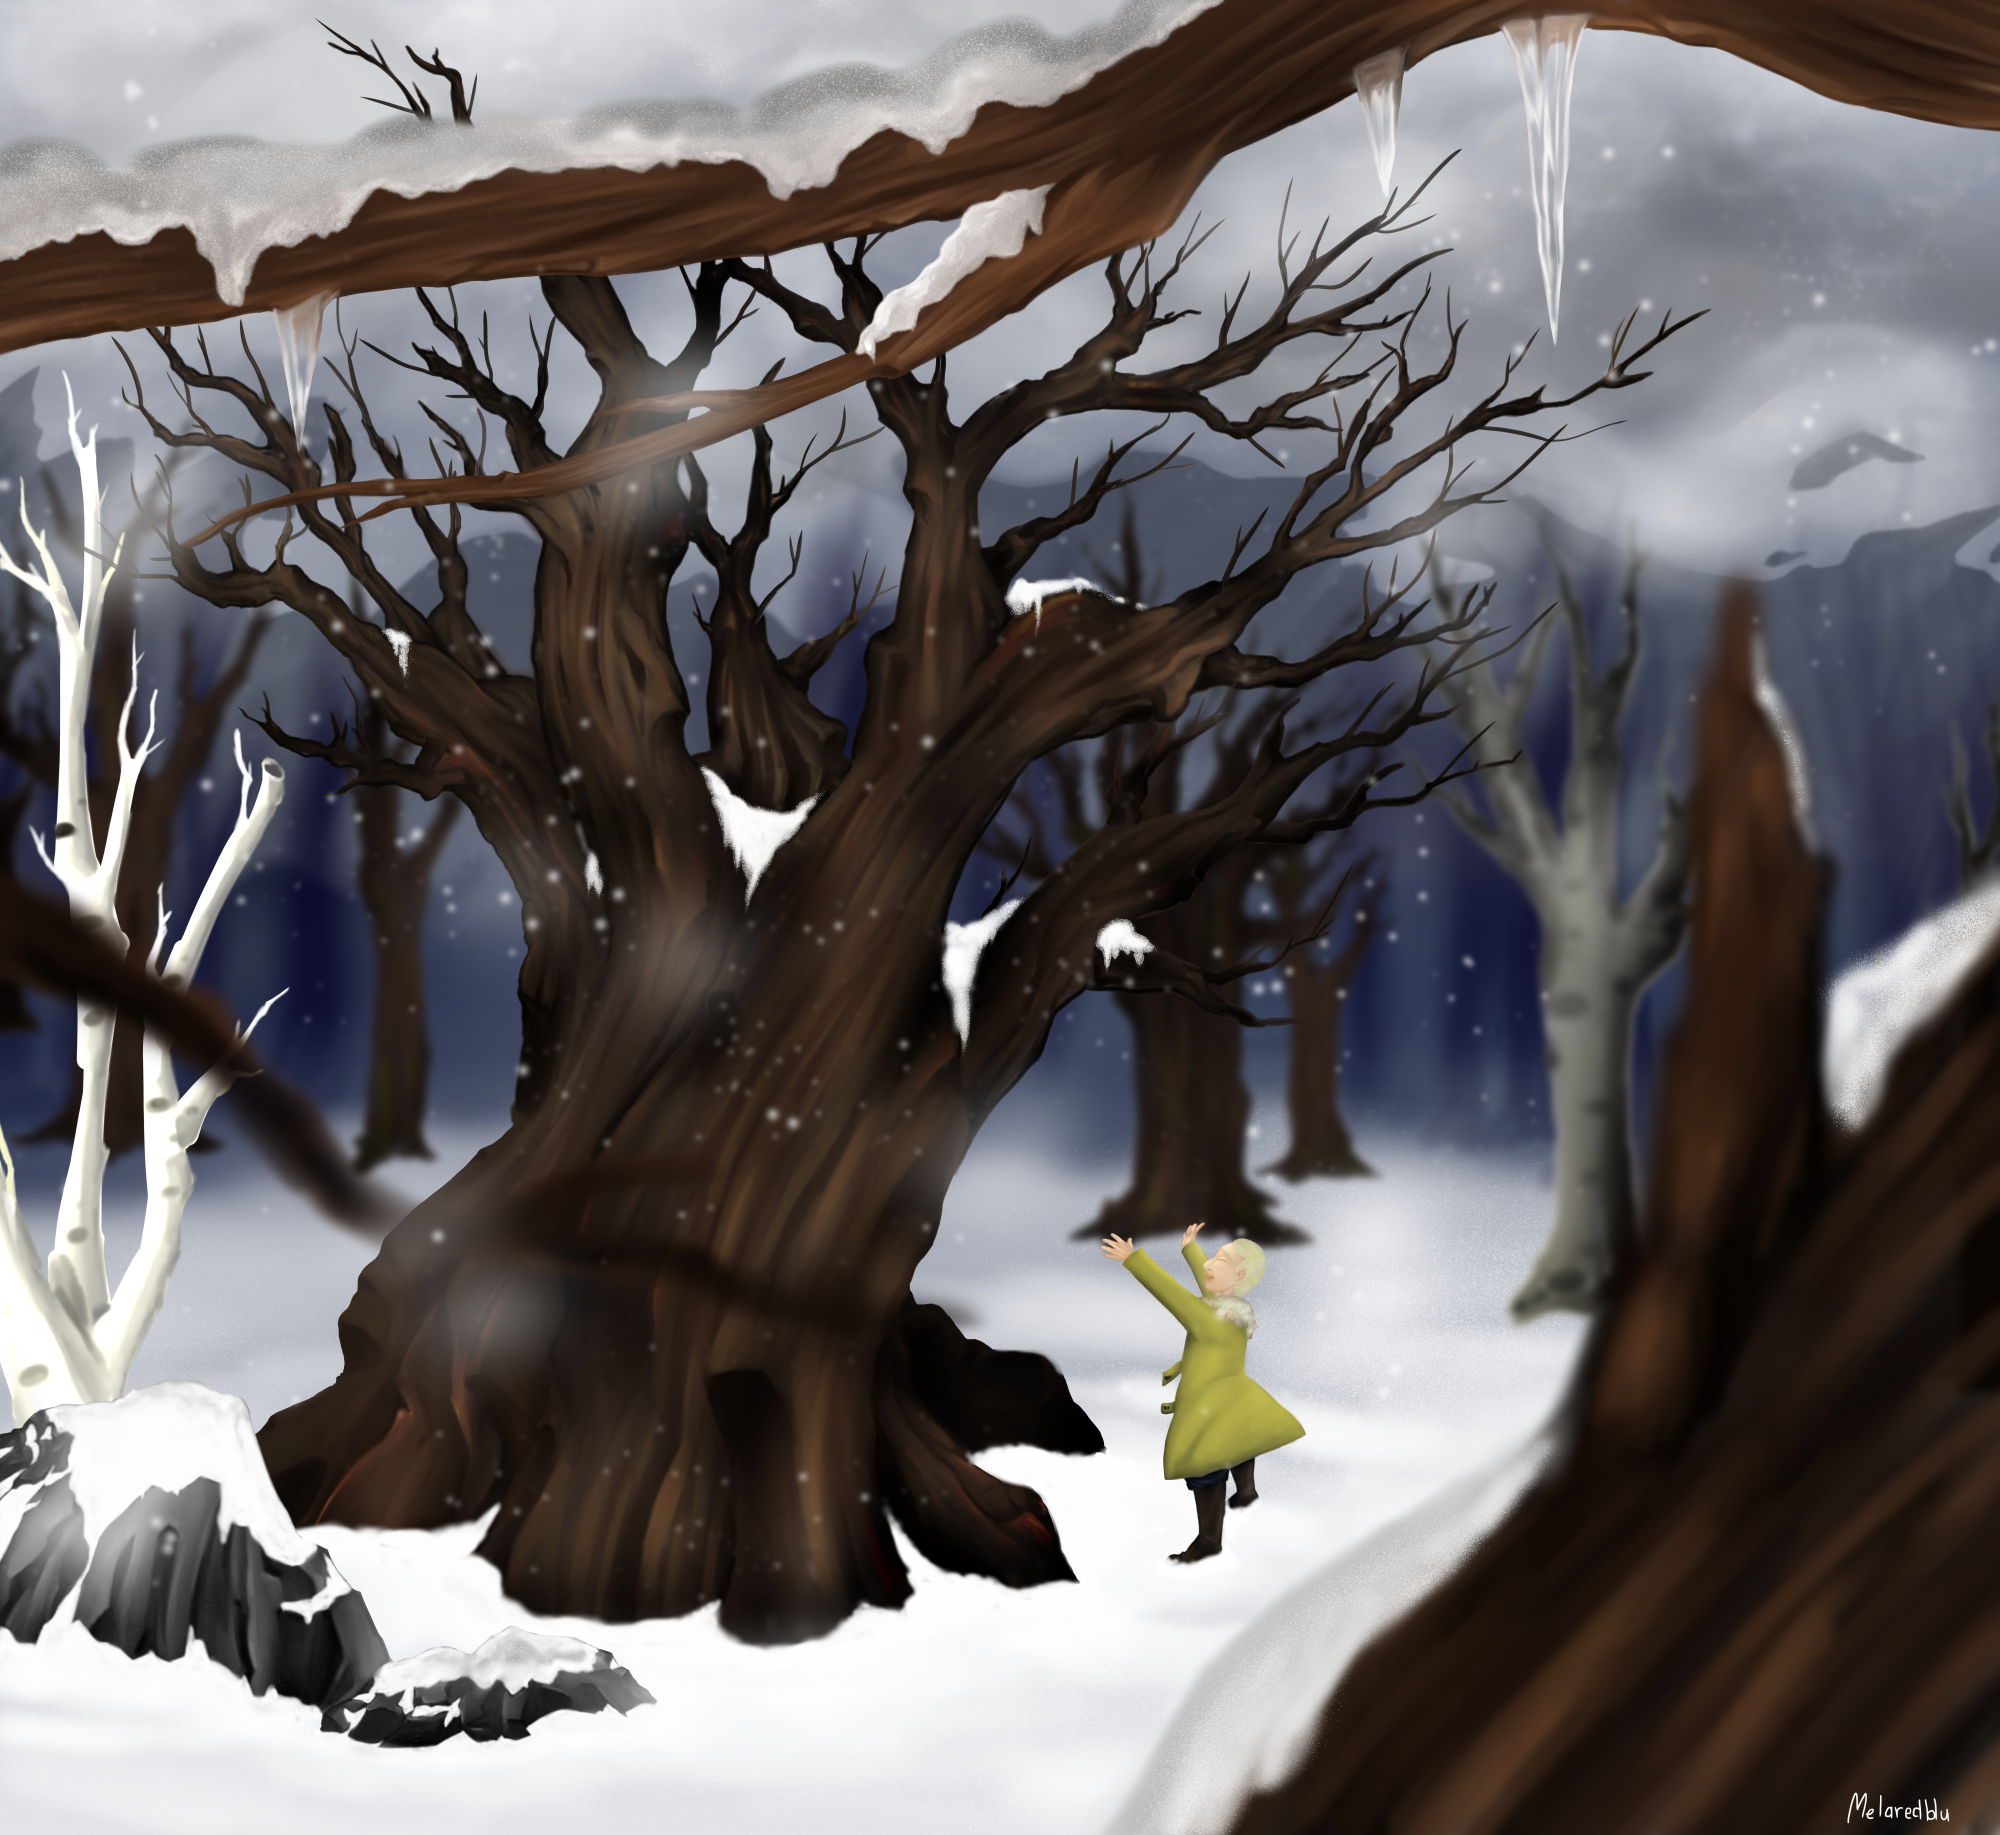 Lechy and the Oak Art by Melaredblu And Story by Vas